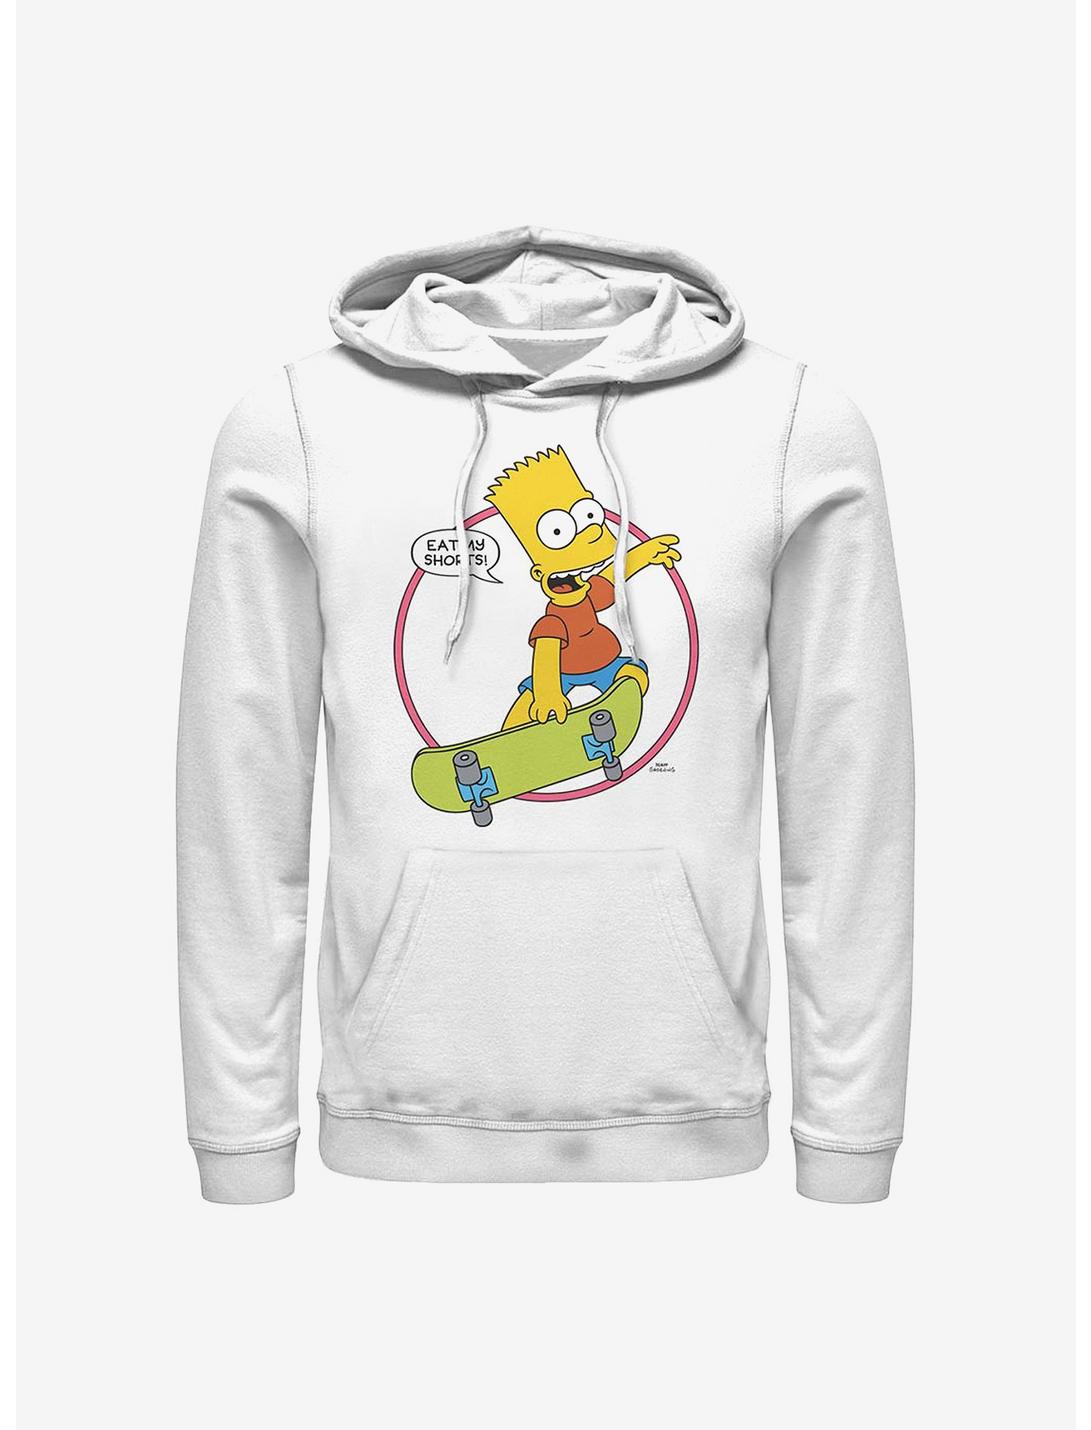 The Simpsons Eat Shorts Hoodie, WHITE, hi-res